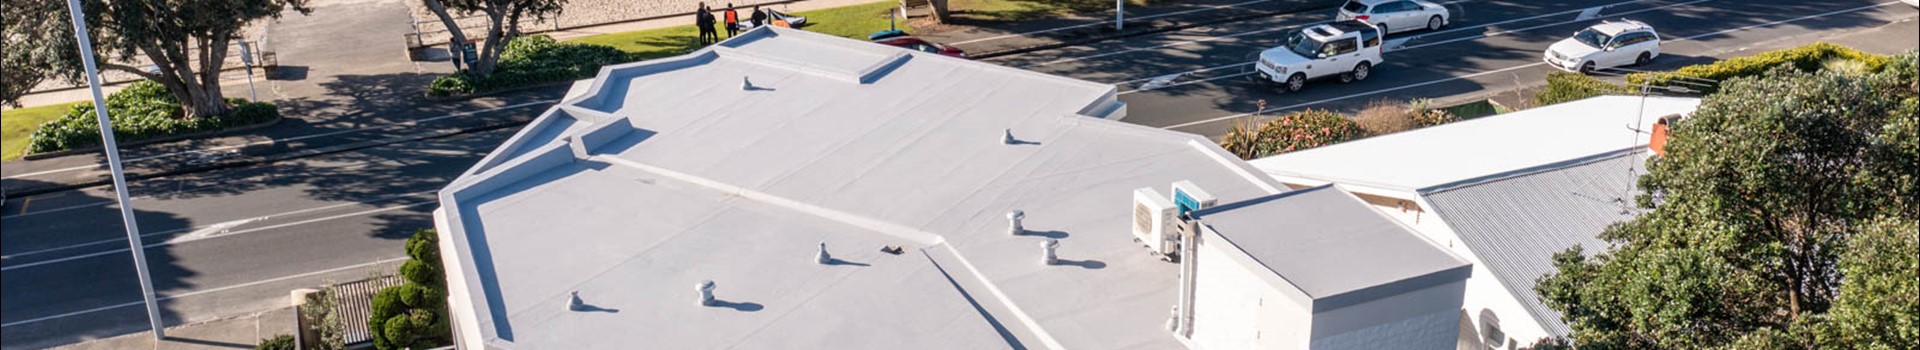 Fit-For-Purpose Membrane Roof Systems from Viking Roofspec